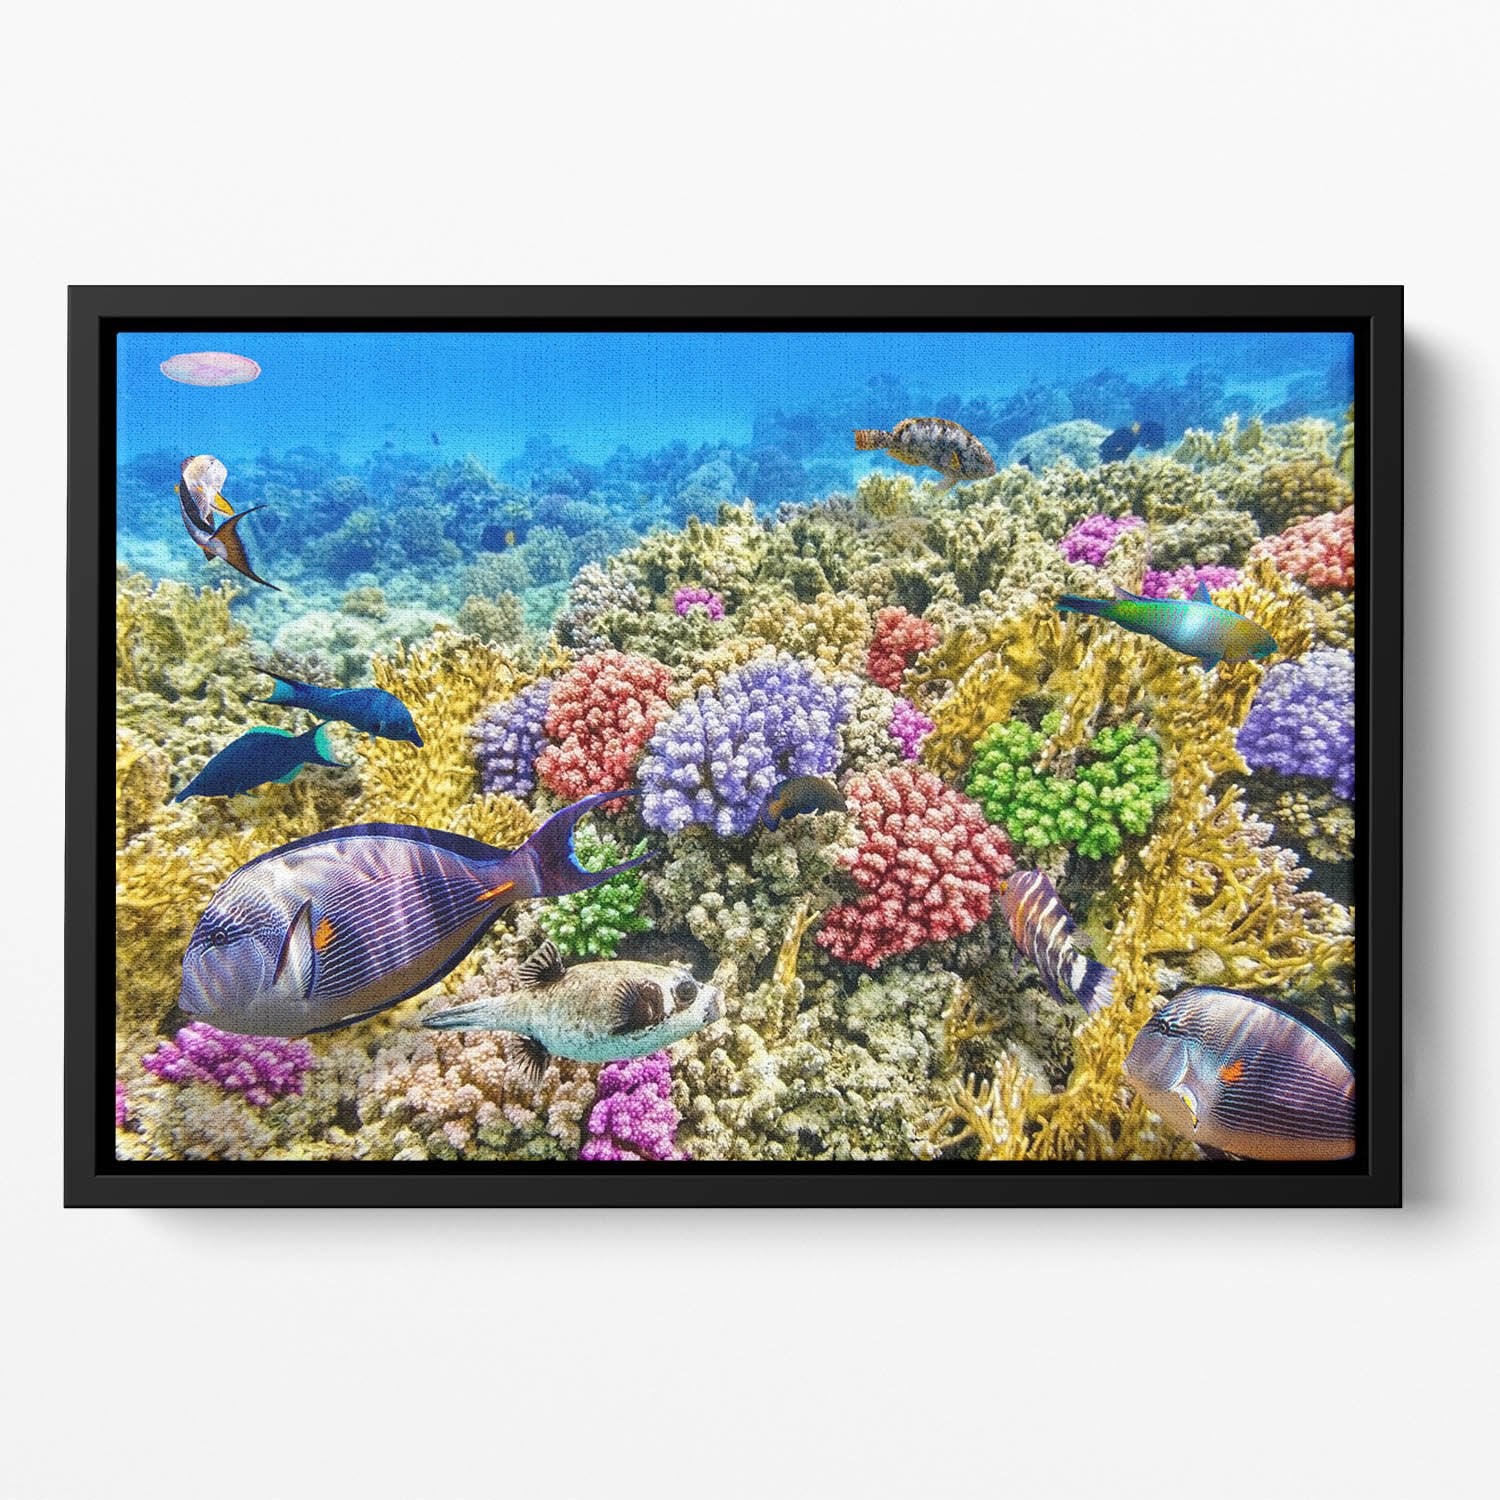 Underwater world with corals and tropical fish Floating Framed Canvas